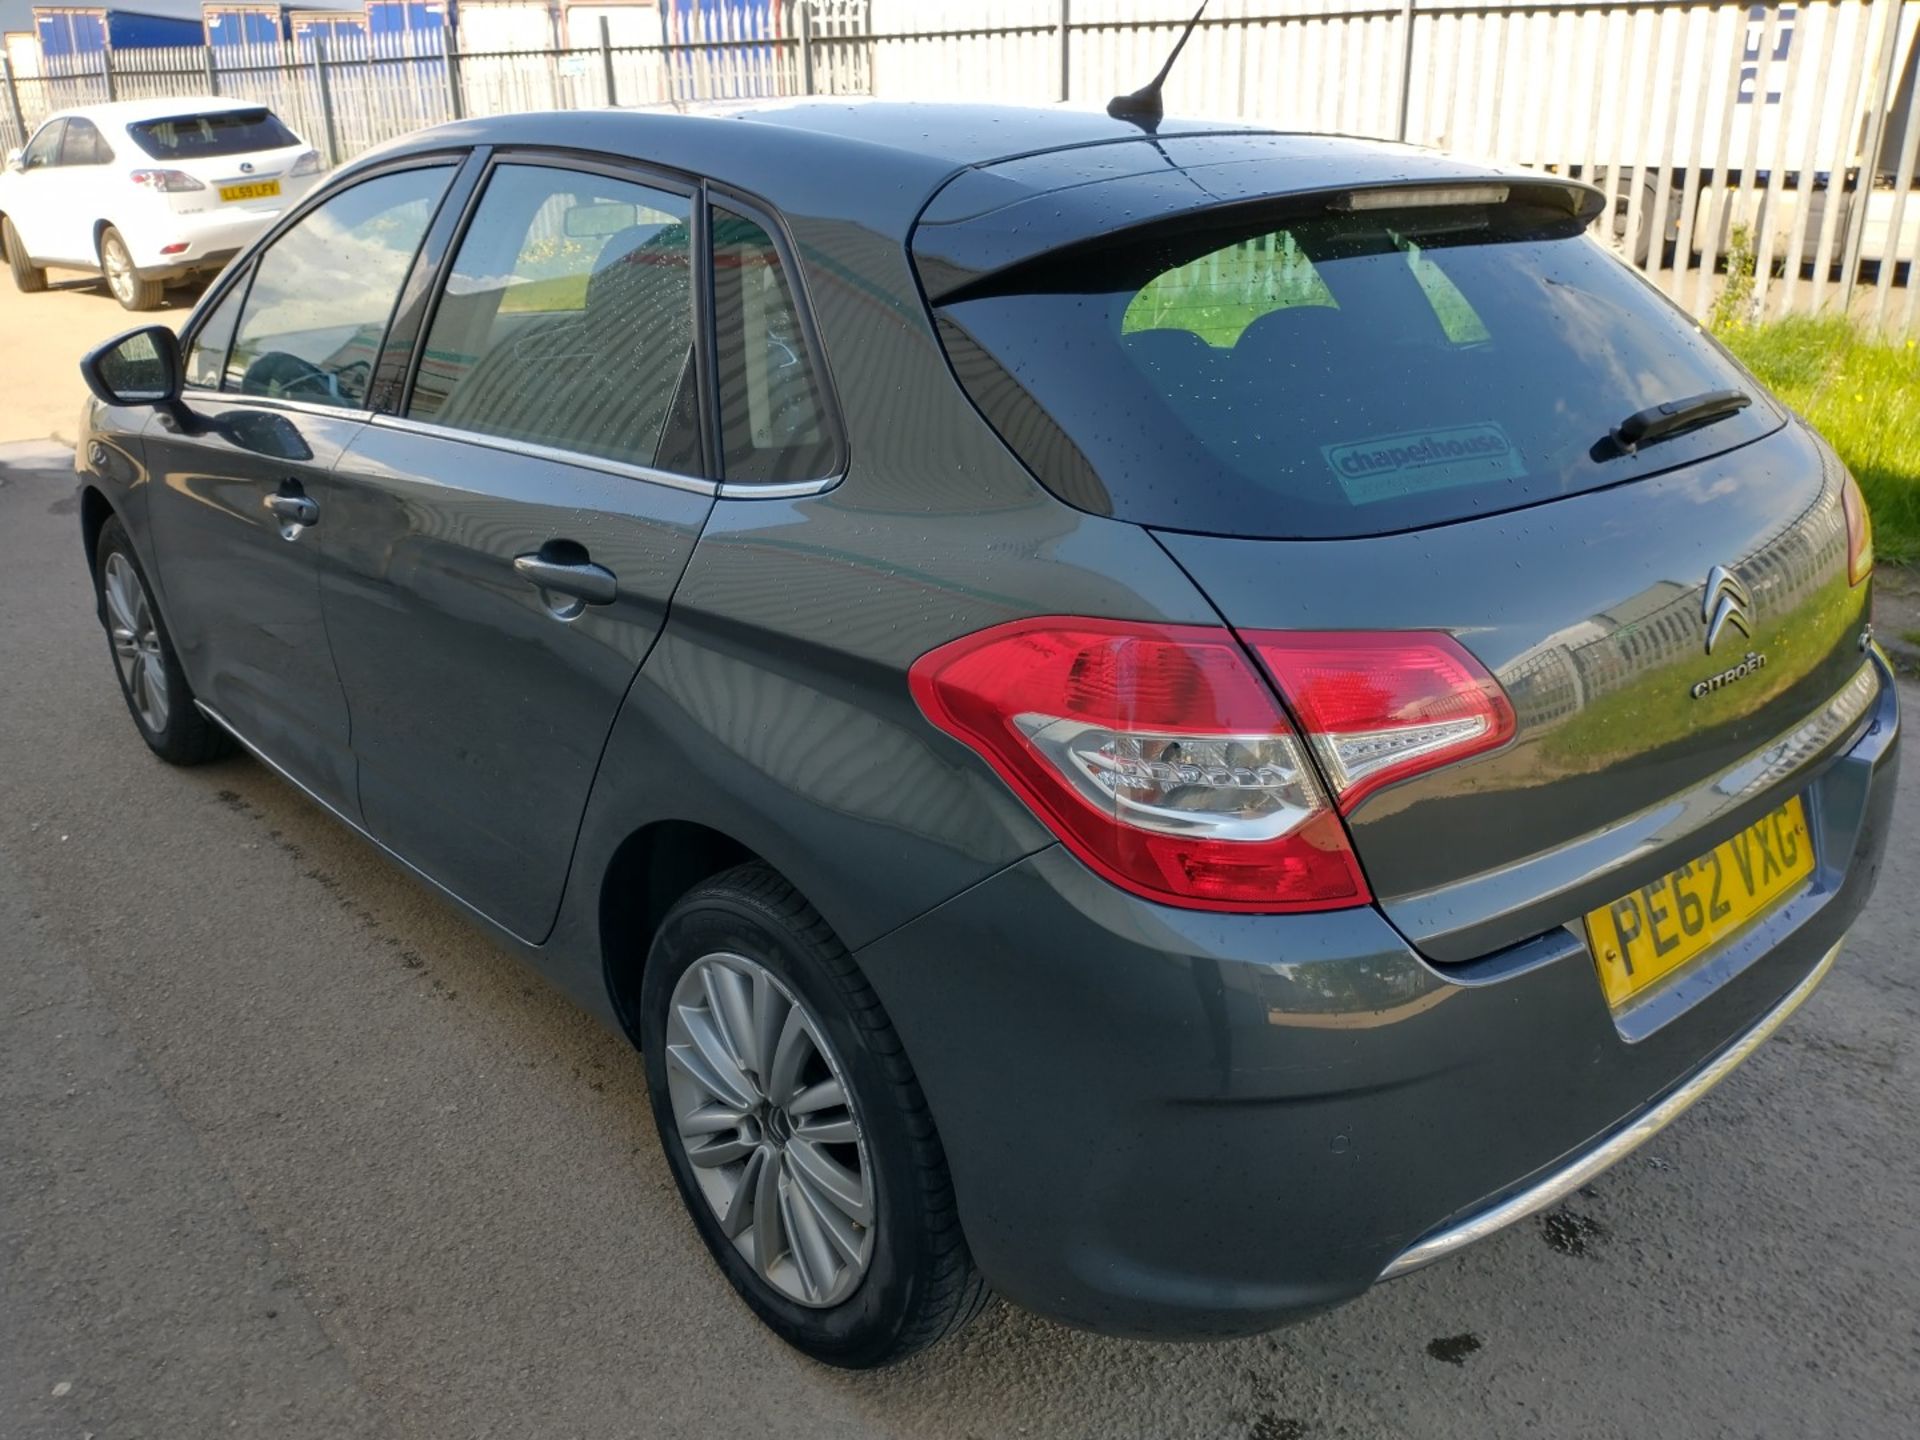 2012 Citreon C4 VTR+ Hdi 91 5dr Hatchback - CL505 - NO VAT ON THE HAMMER - Location: Corby - Image 4 of 20